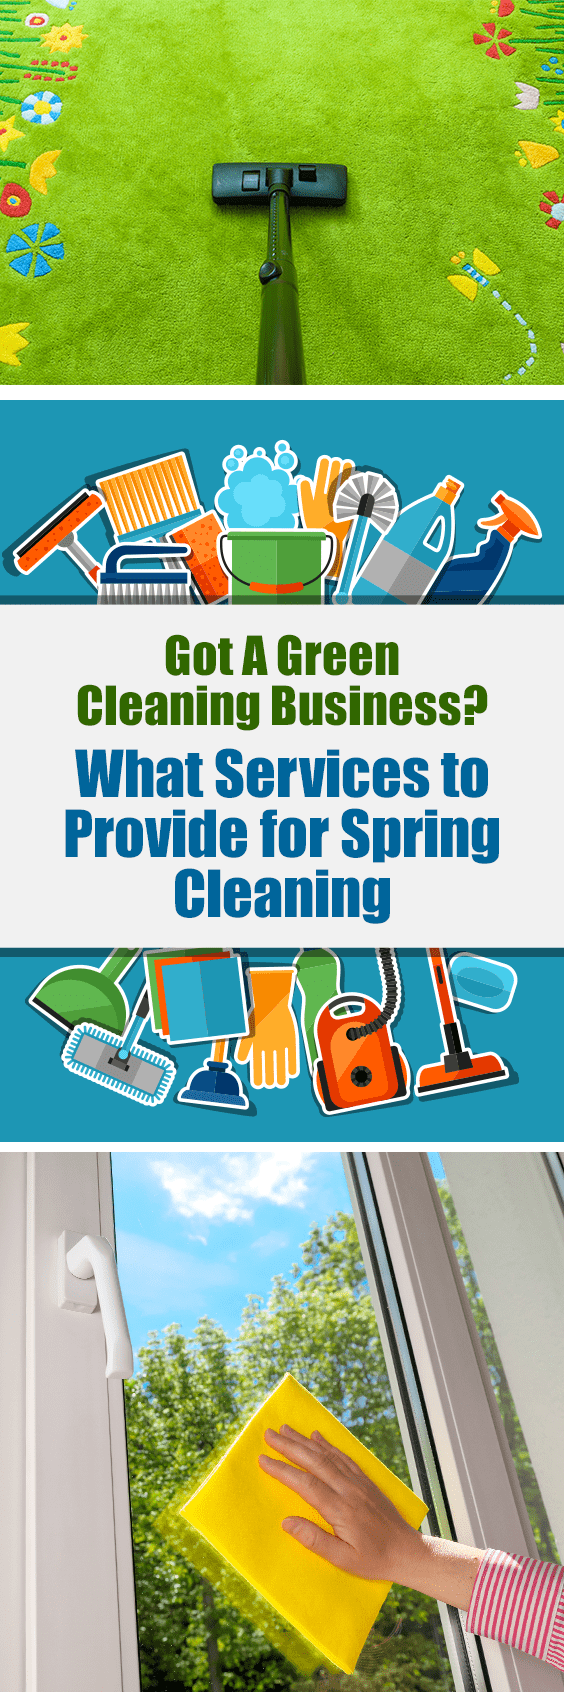 Got a Green Cleaning Business | What Services to Provide for Spring Cleaning ...  Finally spring has arrived!  Cabin fever has been driving us crazy.  This is the time of year we are energized to dust ourselves off and break out of hibernation.  This is also the time when your customers are seeking a good spring cleaning with perhaps a renewed desire to embark on a green cleaning regime.